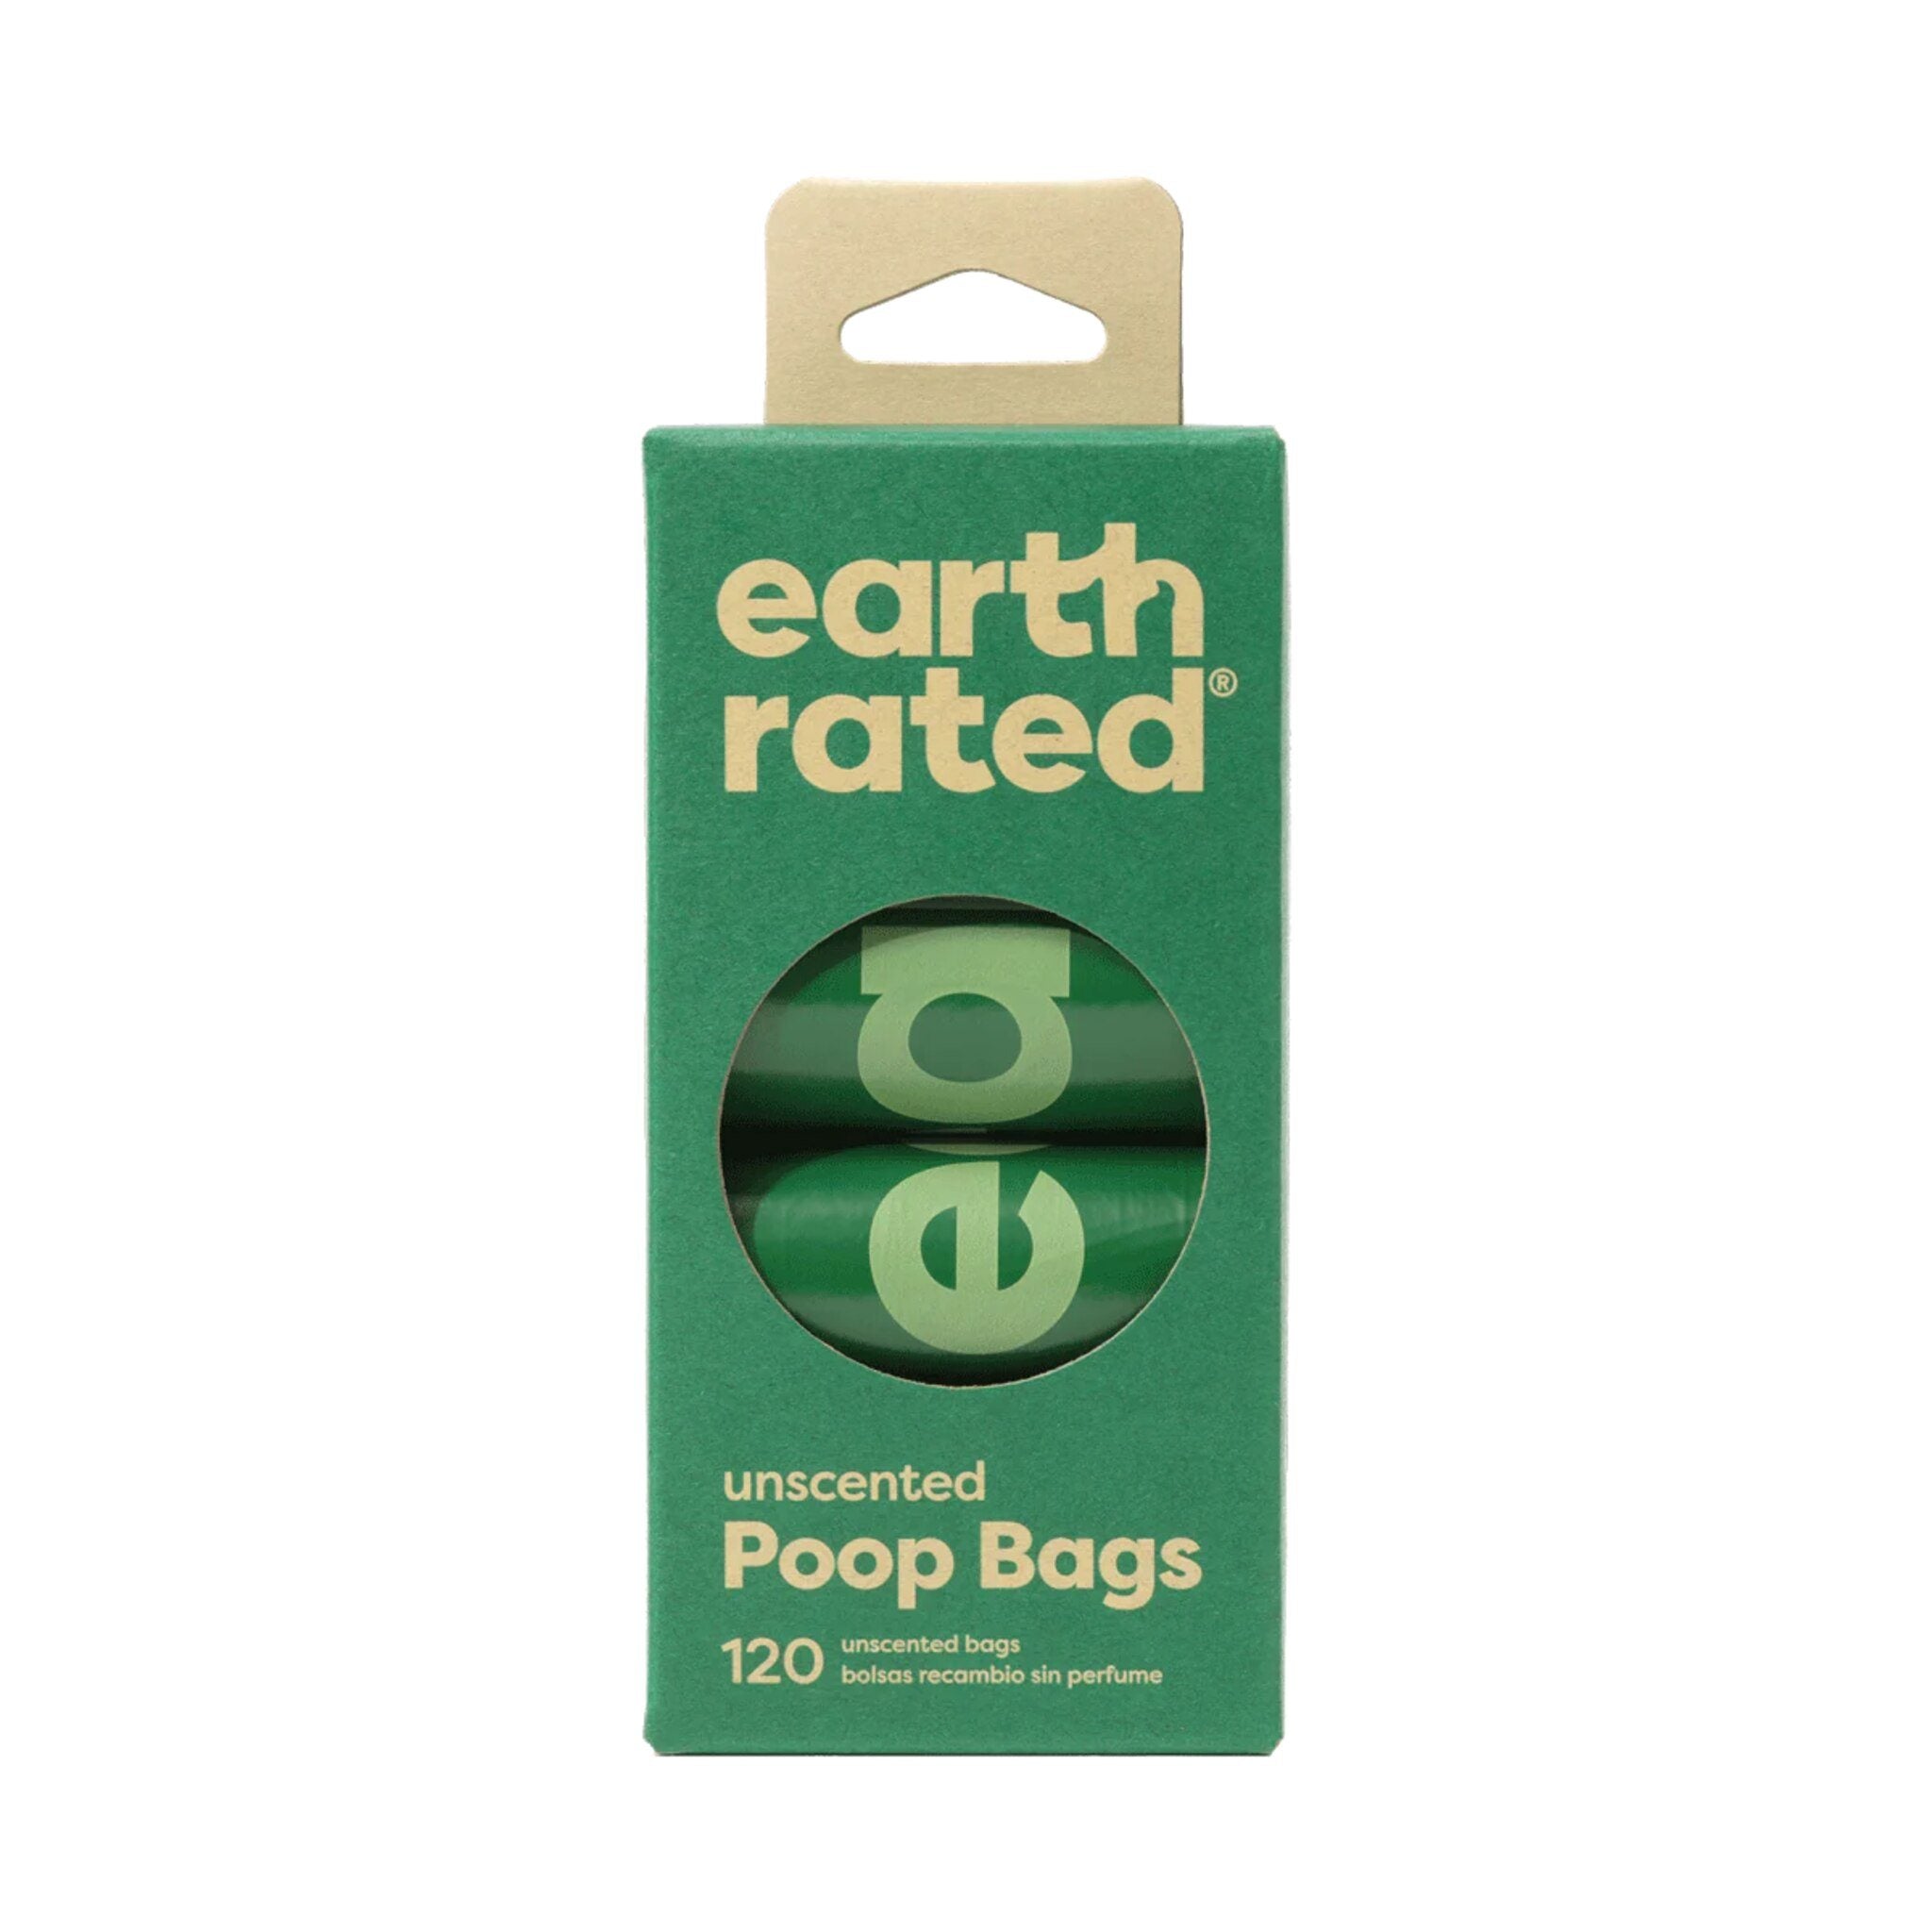 Earth Rated Poop Bags Refill Rolls Unscented 120 ct